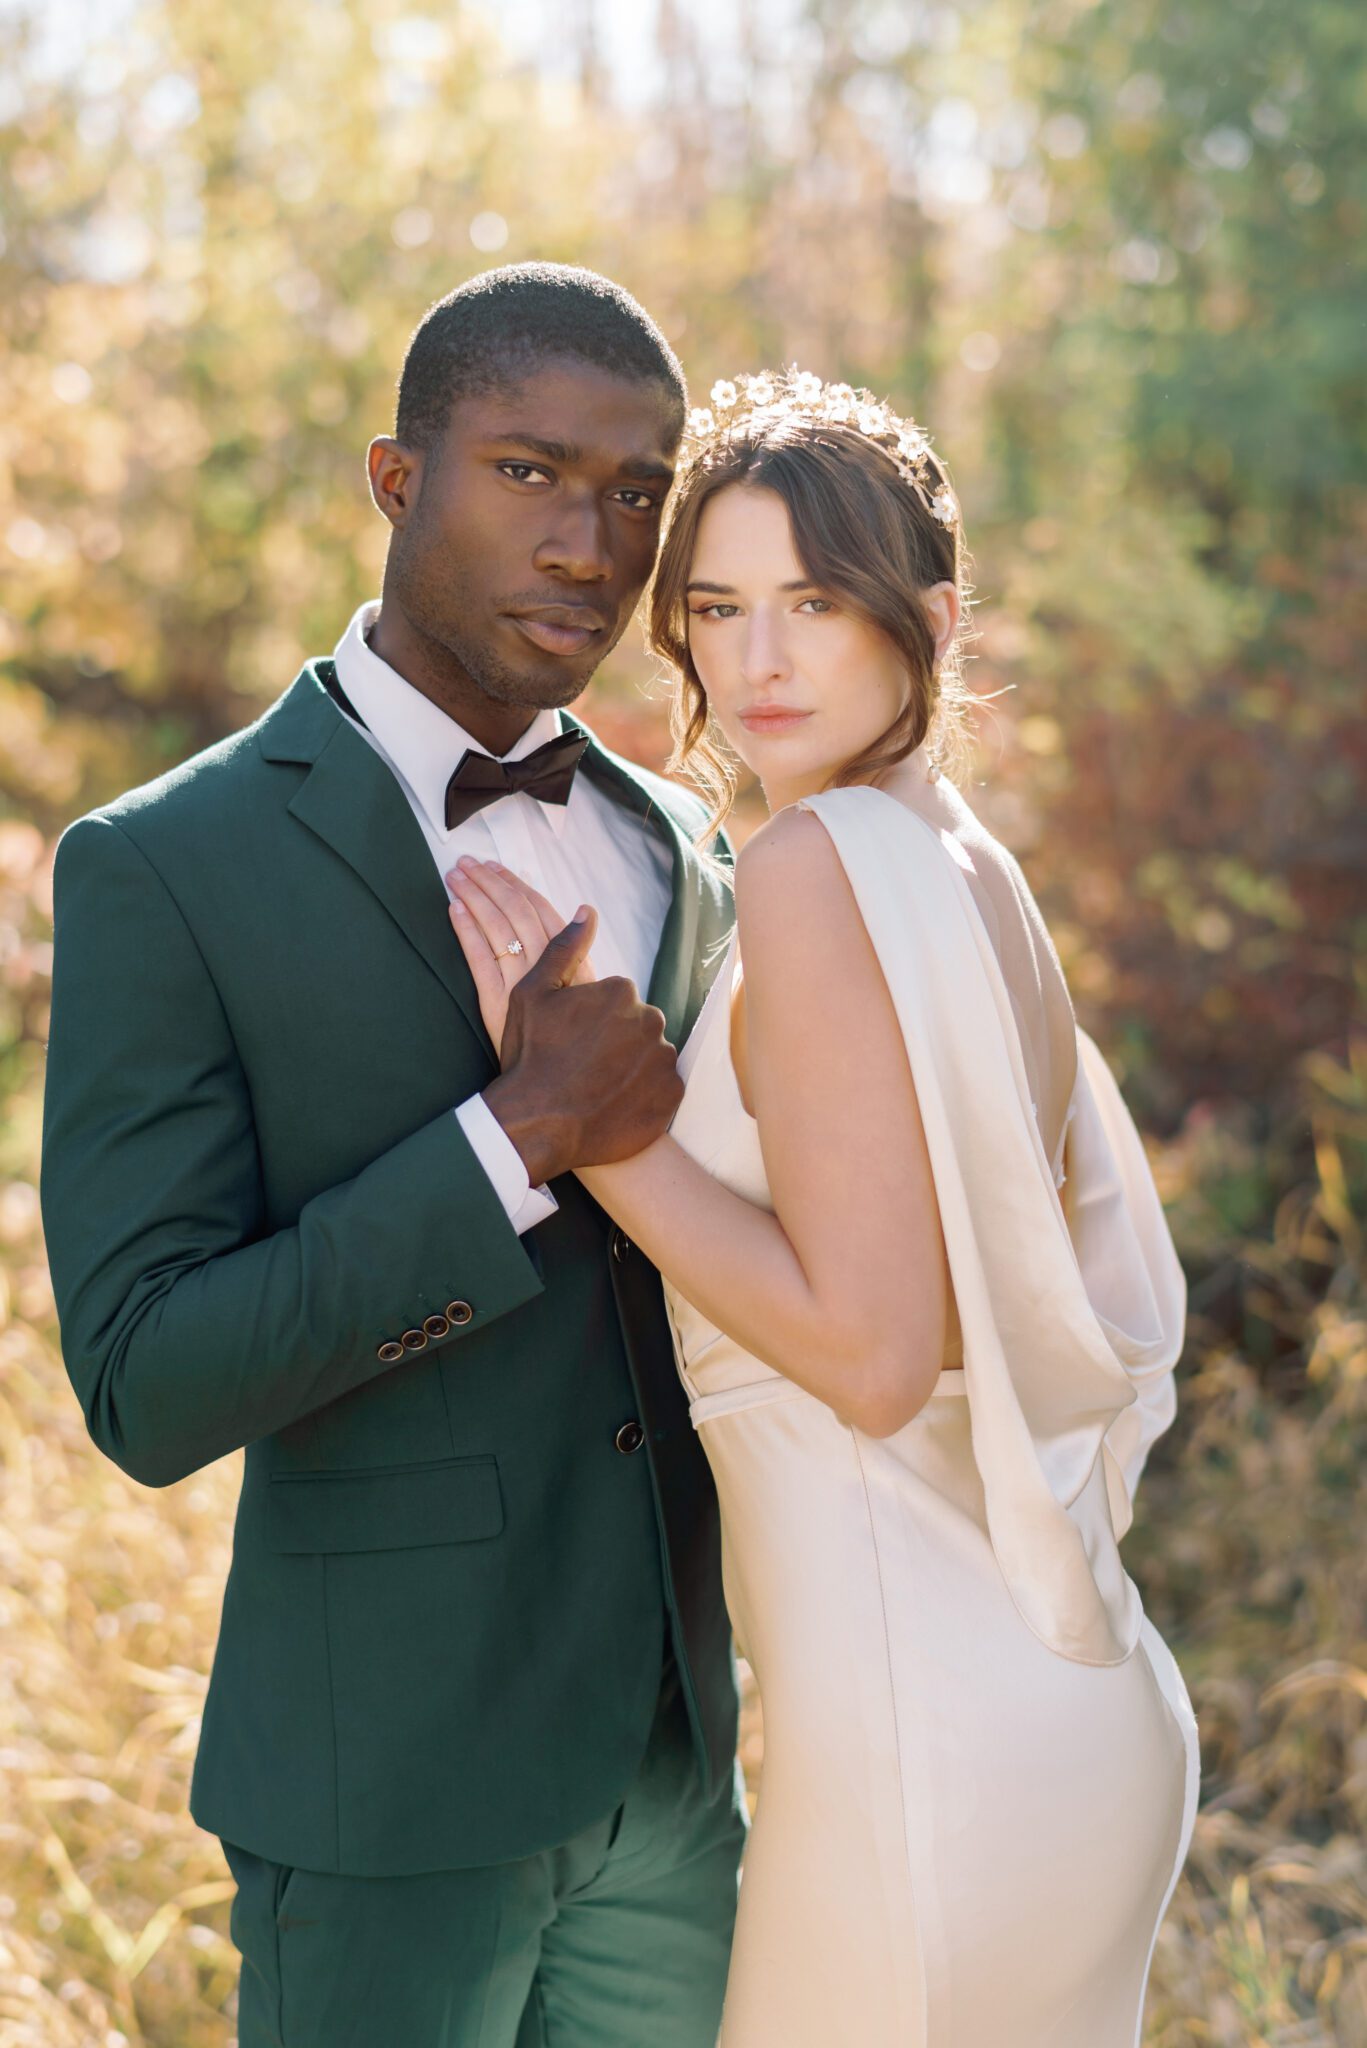 Couple embracing at intimate Fall wedding, groom wearing emerald green suit, and bride in elegant satin gown with low back.